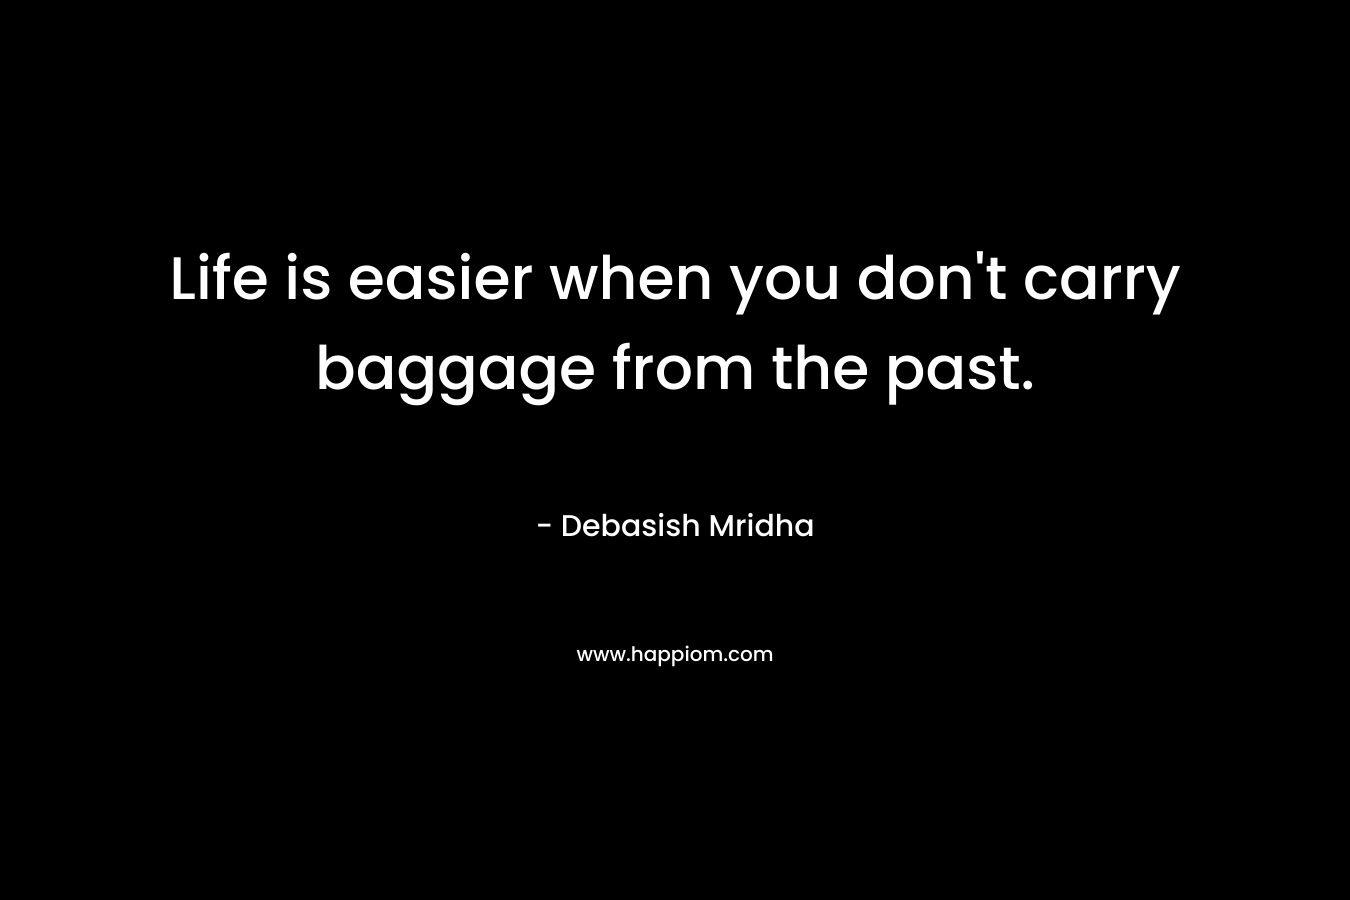 Life is easier when you don’t carry baggage from the past. – Debasish Mridha